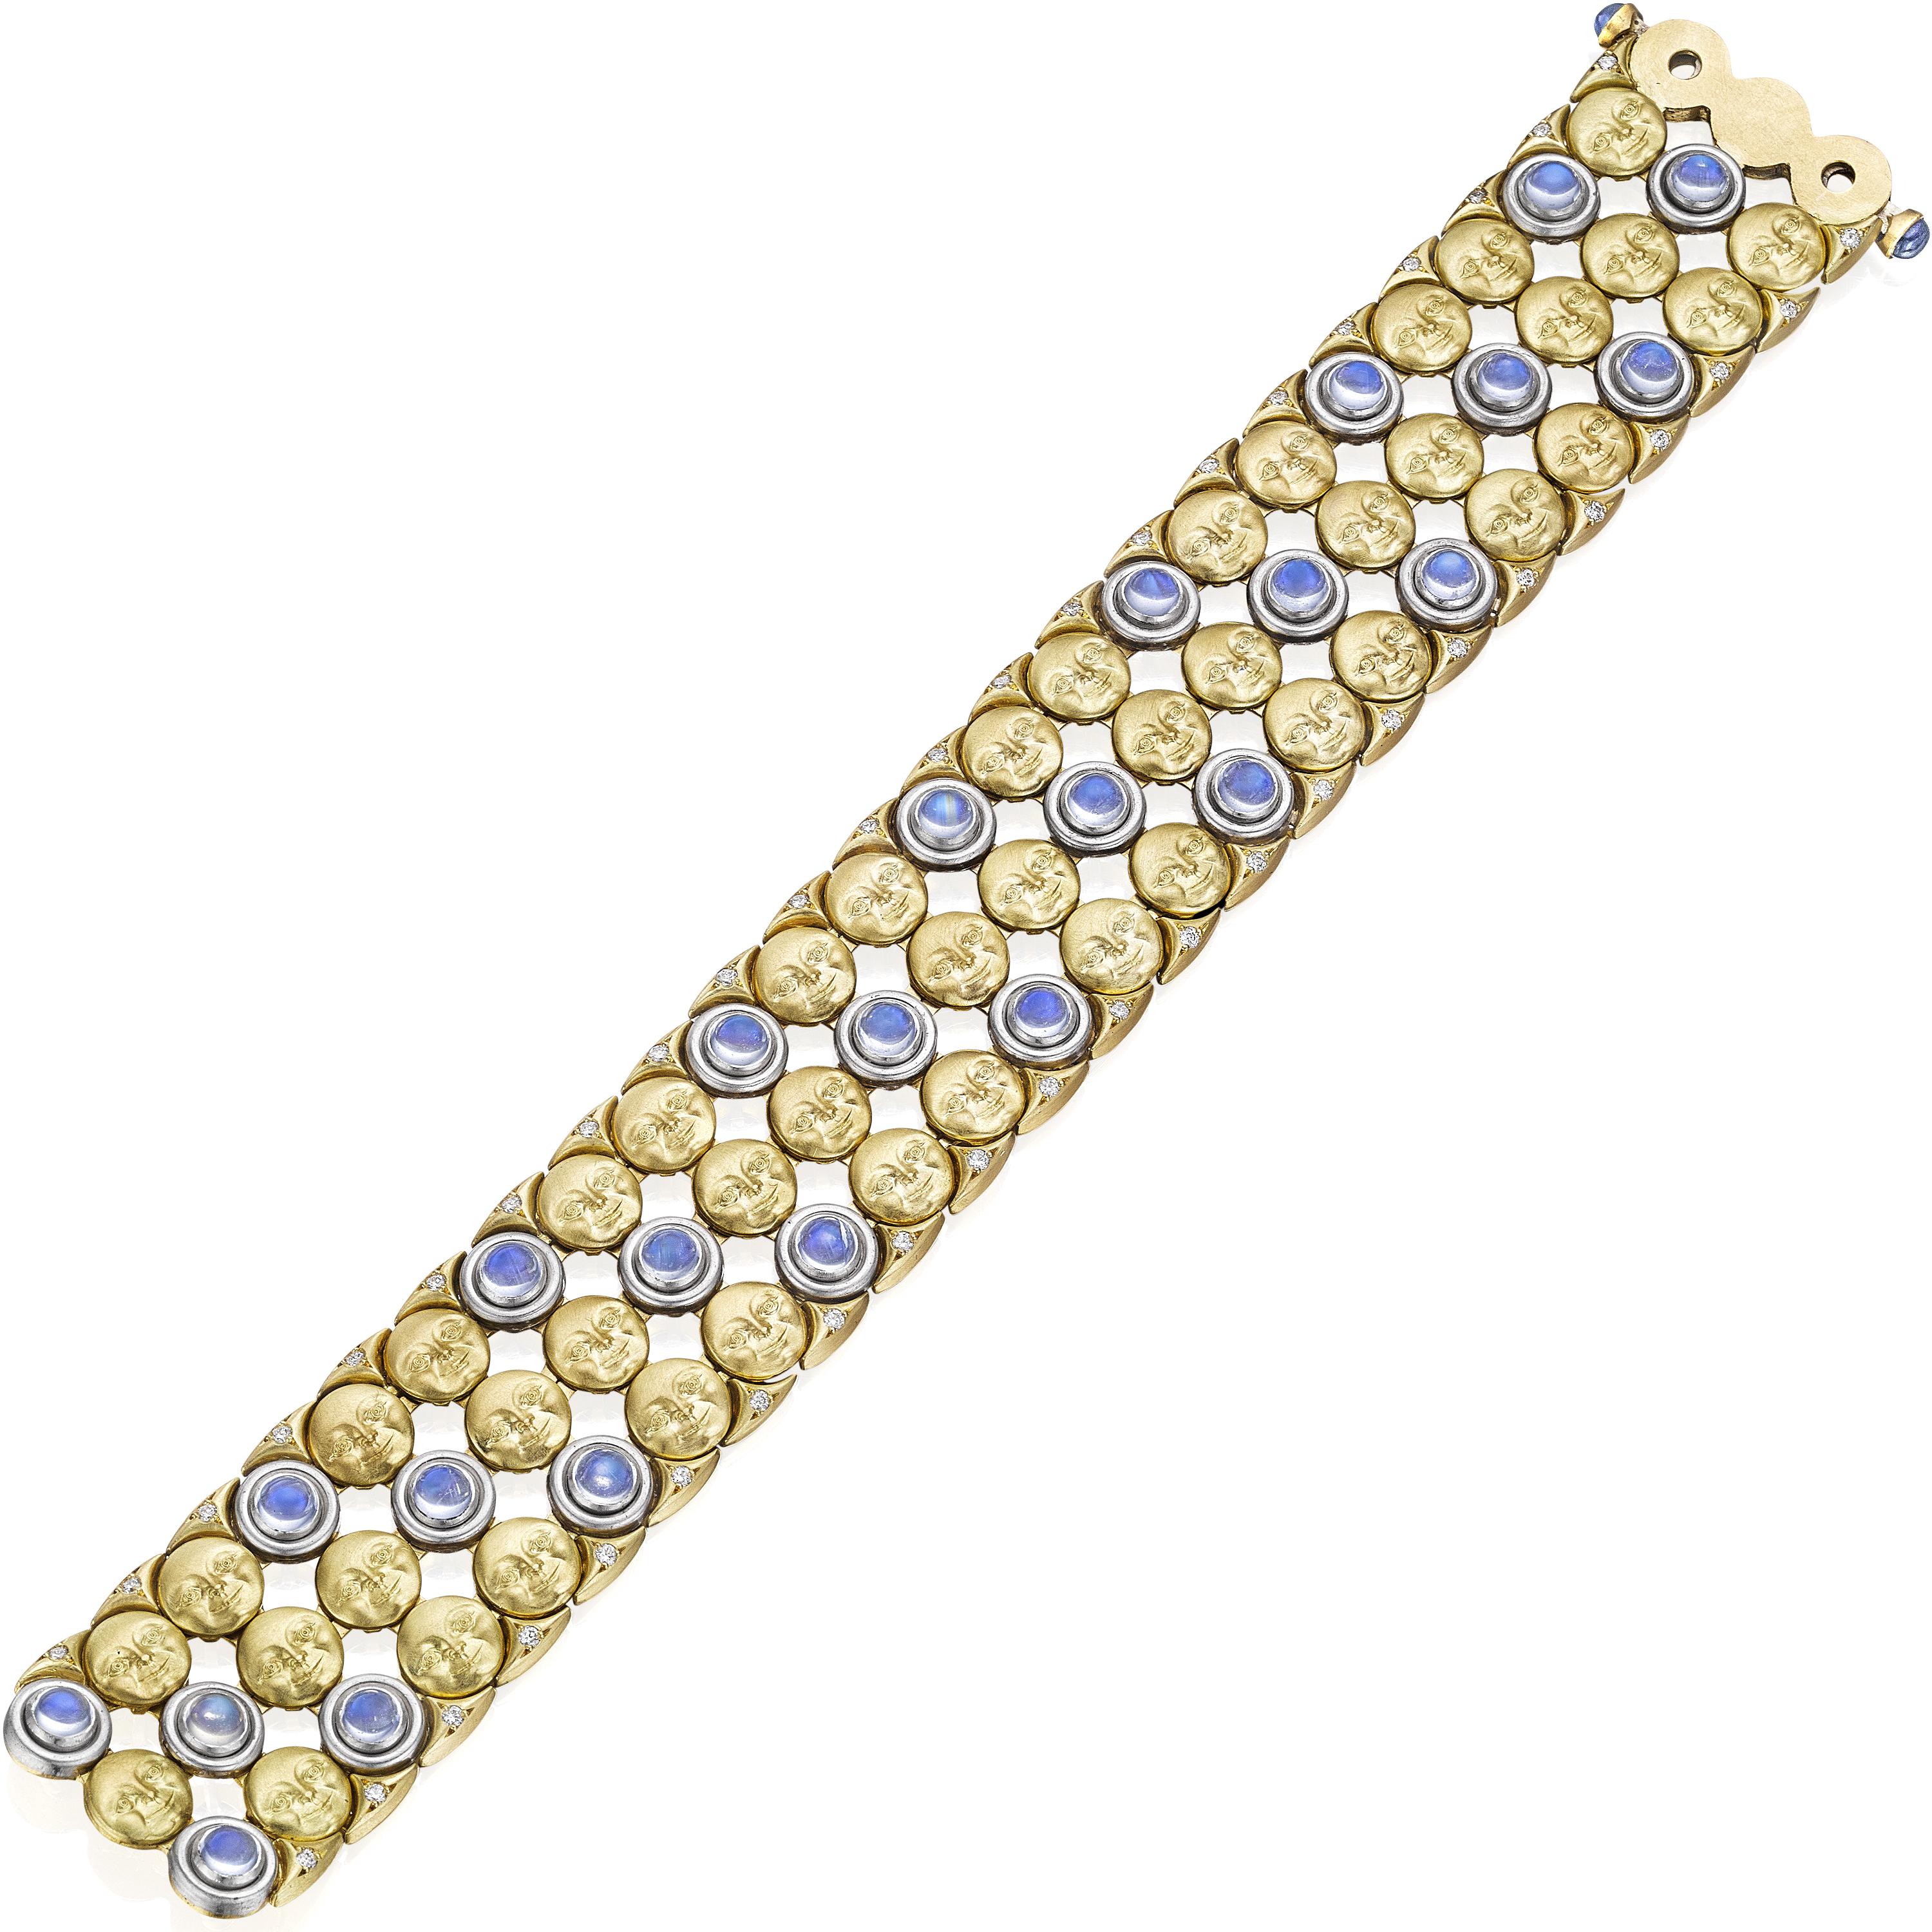 One of a Kind Moonface Mesh Bracelet intricately handcrafted by jewelry artist Anthony Lent in platinum, 18k yellow gold, and 18k white gold featuring 5.52 total carats of moonstone and round brilliant-cut white diamonds totaling 1.15 carats. Double